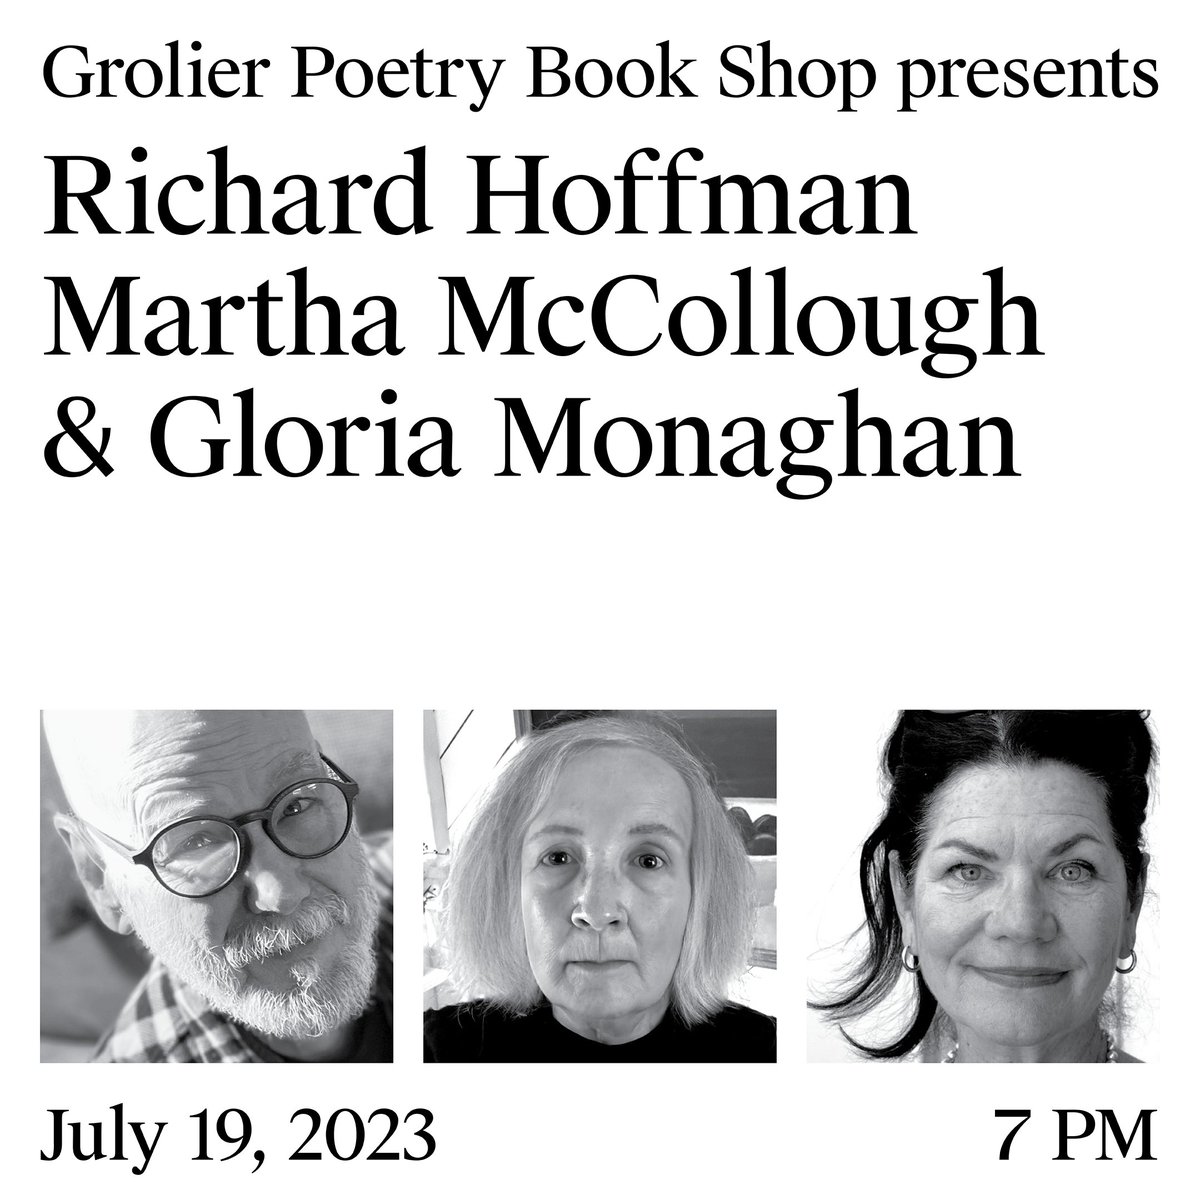 Richard Hoffman, Martha McCollough and Gloria Monaghan are reading at the Grolier on Wednesday July 19th, 2023 at 7 pm. The event is in collaboration with Lily Poetry Review Books. While in-person tickets are sold out, spots are still available to attend virtually.